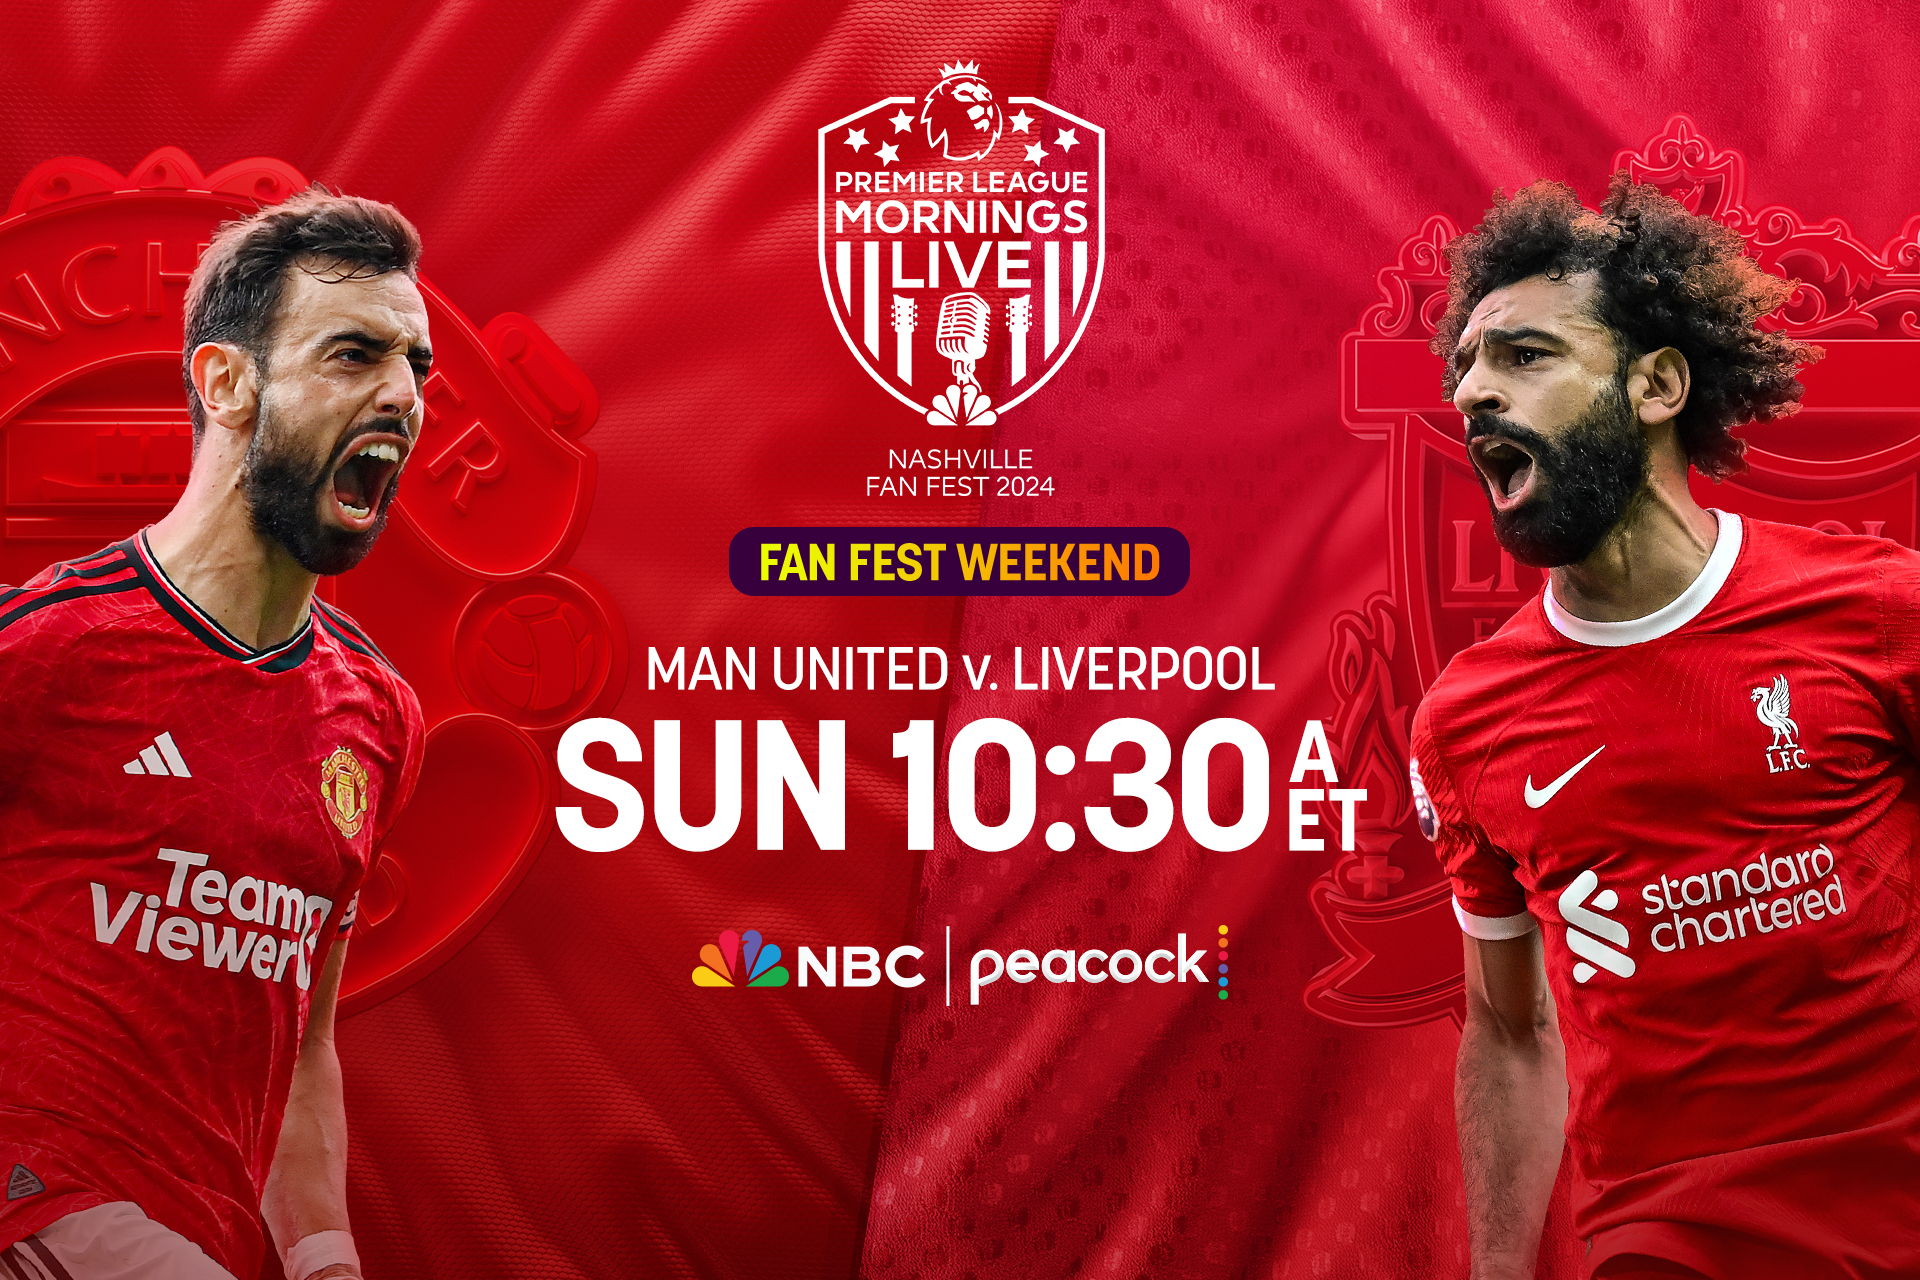 Man United will face Liverpool Sunday Apr 7 at 10:30a ET on Peacock and NBC